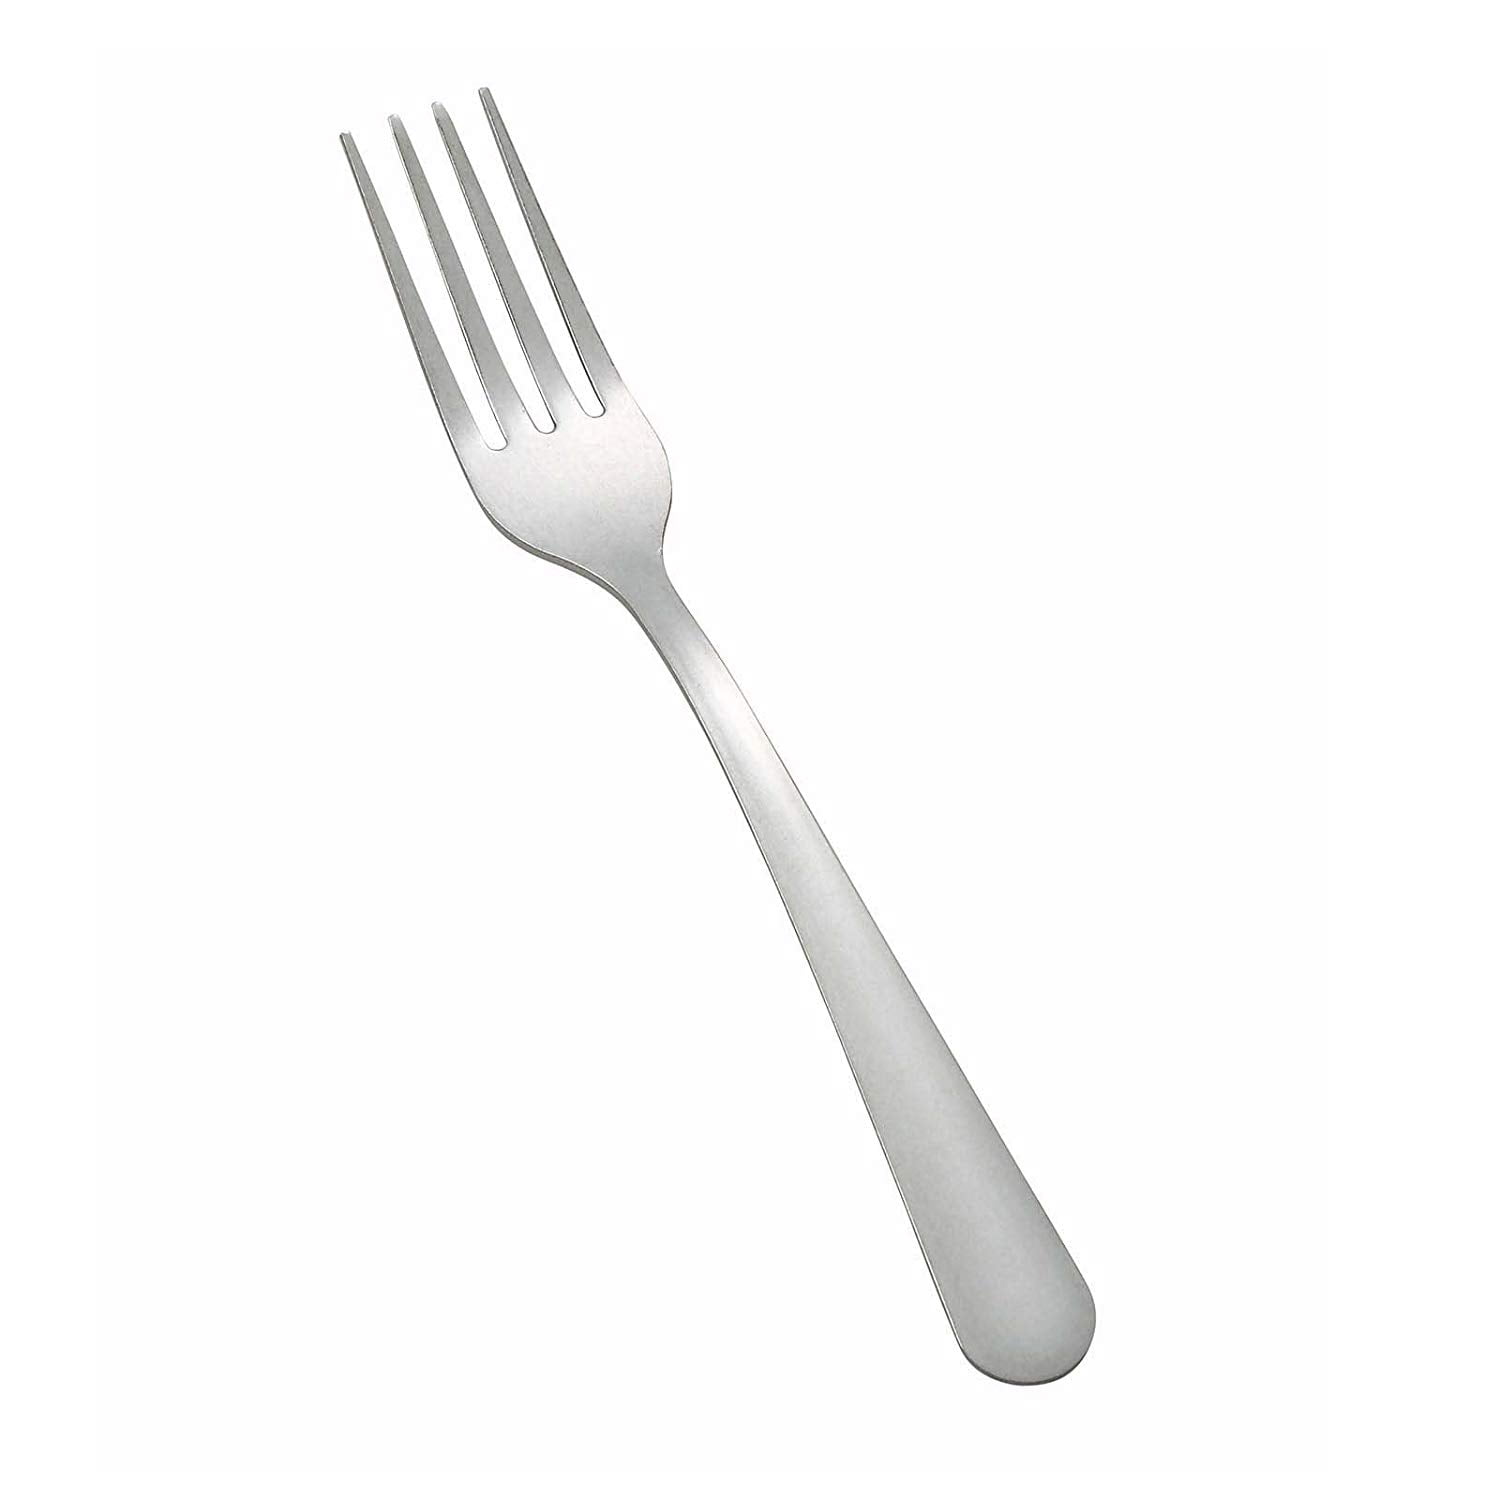 11.5 New Star Foodservice 52046 Hollow Handle 2 Tine Pot Fork Silver